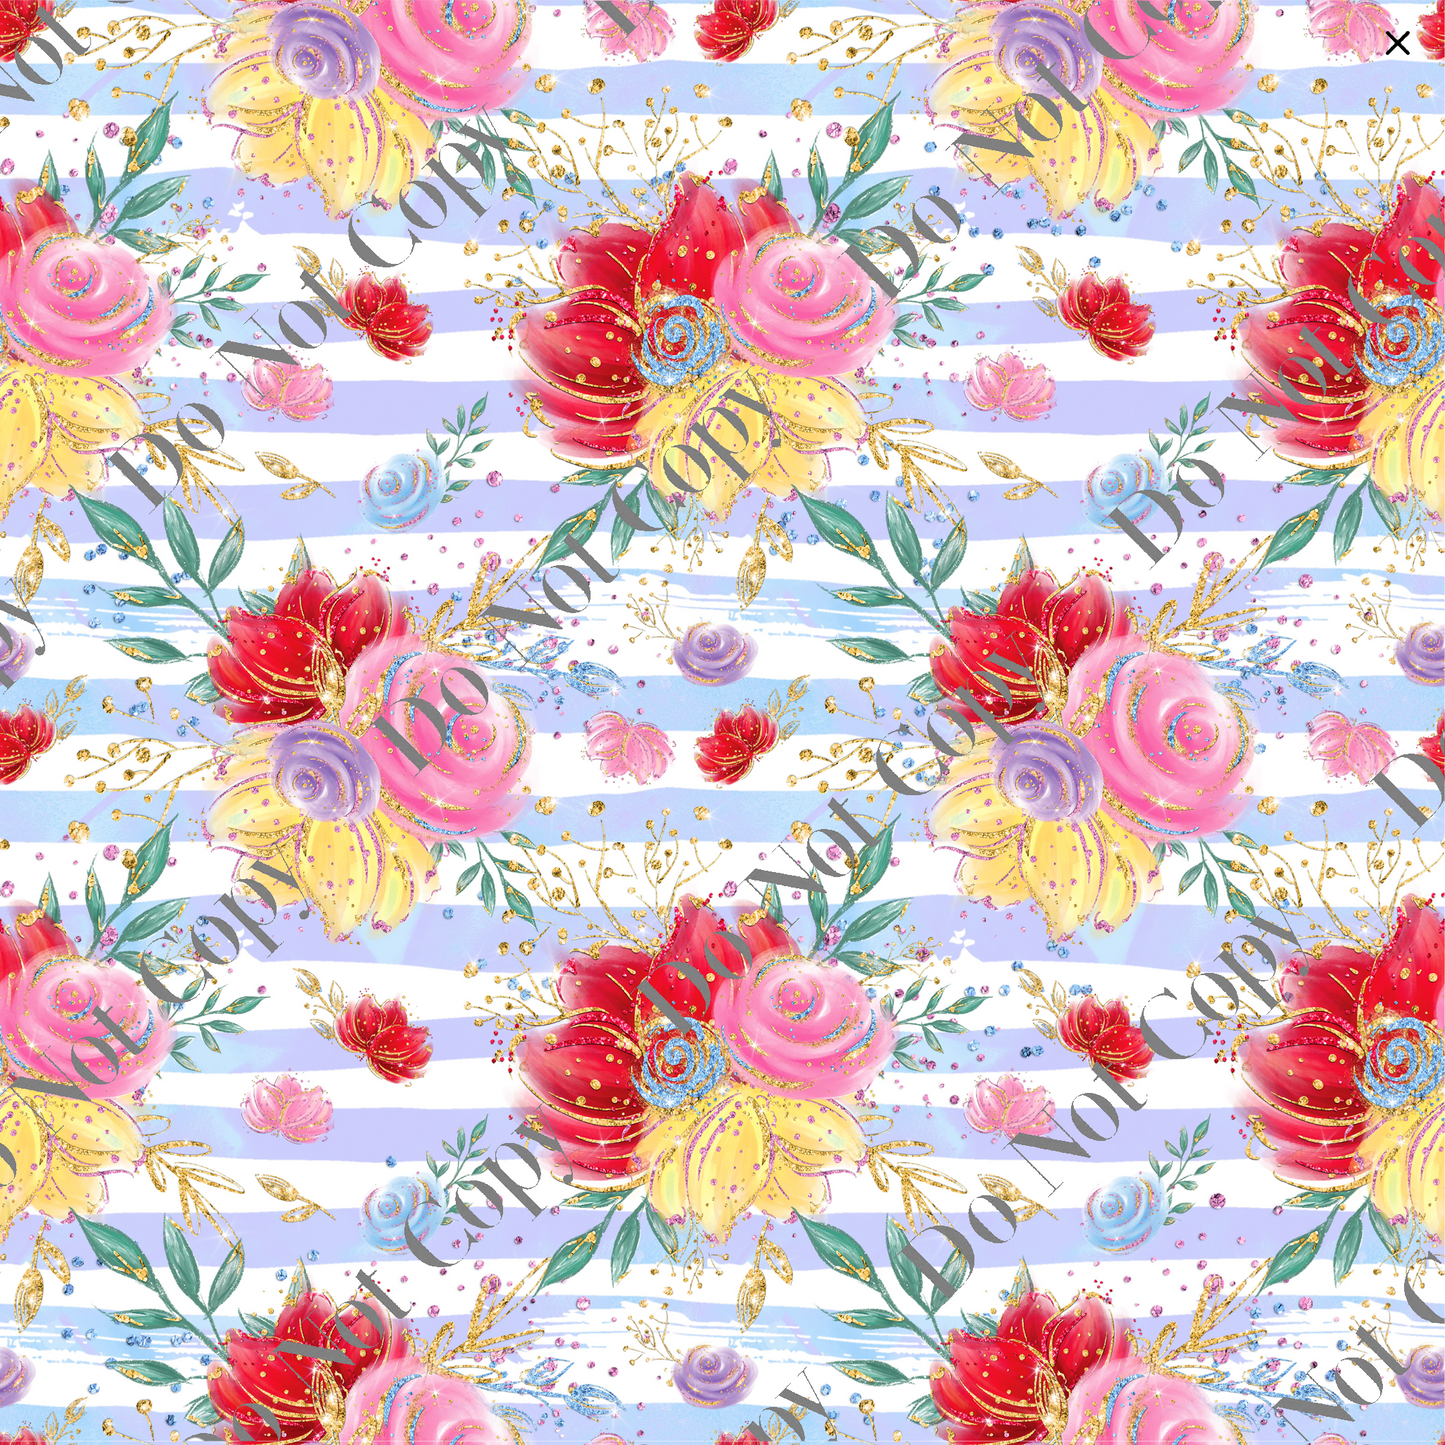 Patterned Vinyl - Red, Pink & Yellow Floral